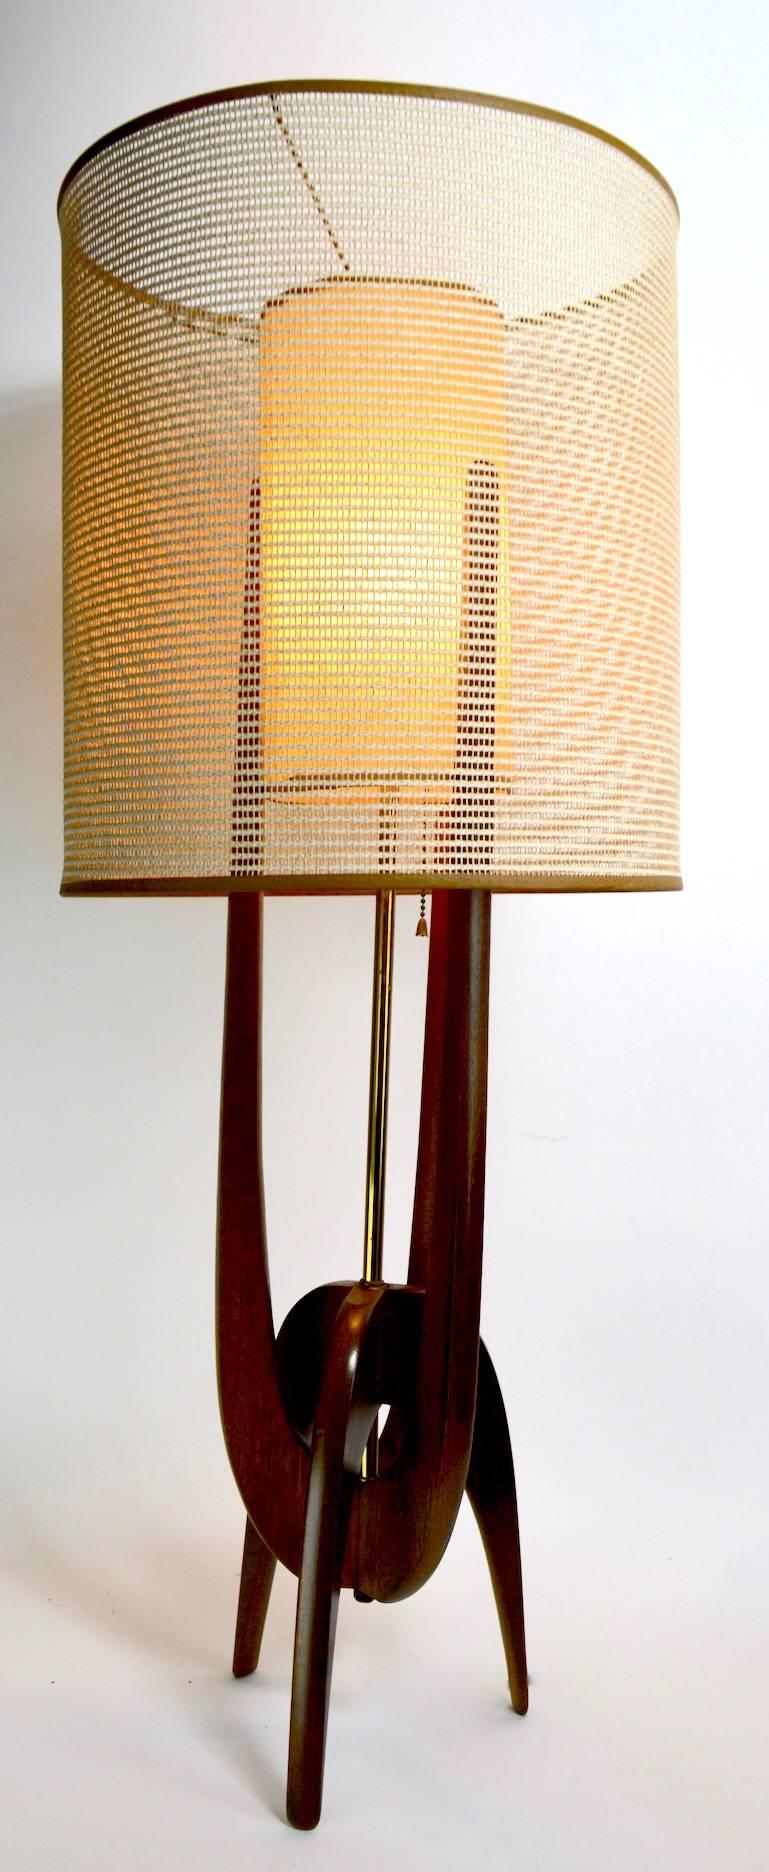 Classic midcentury lamp by Pearsall. This example is in very good, original, clean and working condition. It features the original weave outer shade and textured inner cylinder shade, on sculpted wood bass. Measure: Shade alone 14.75 diameter x